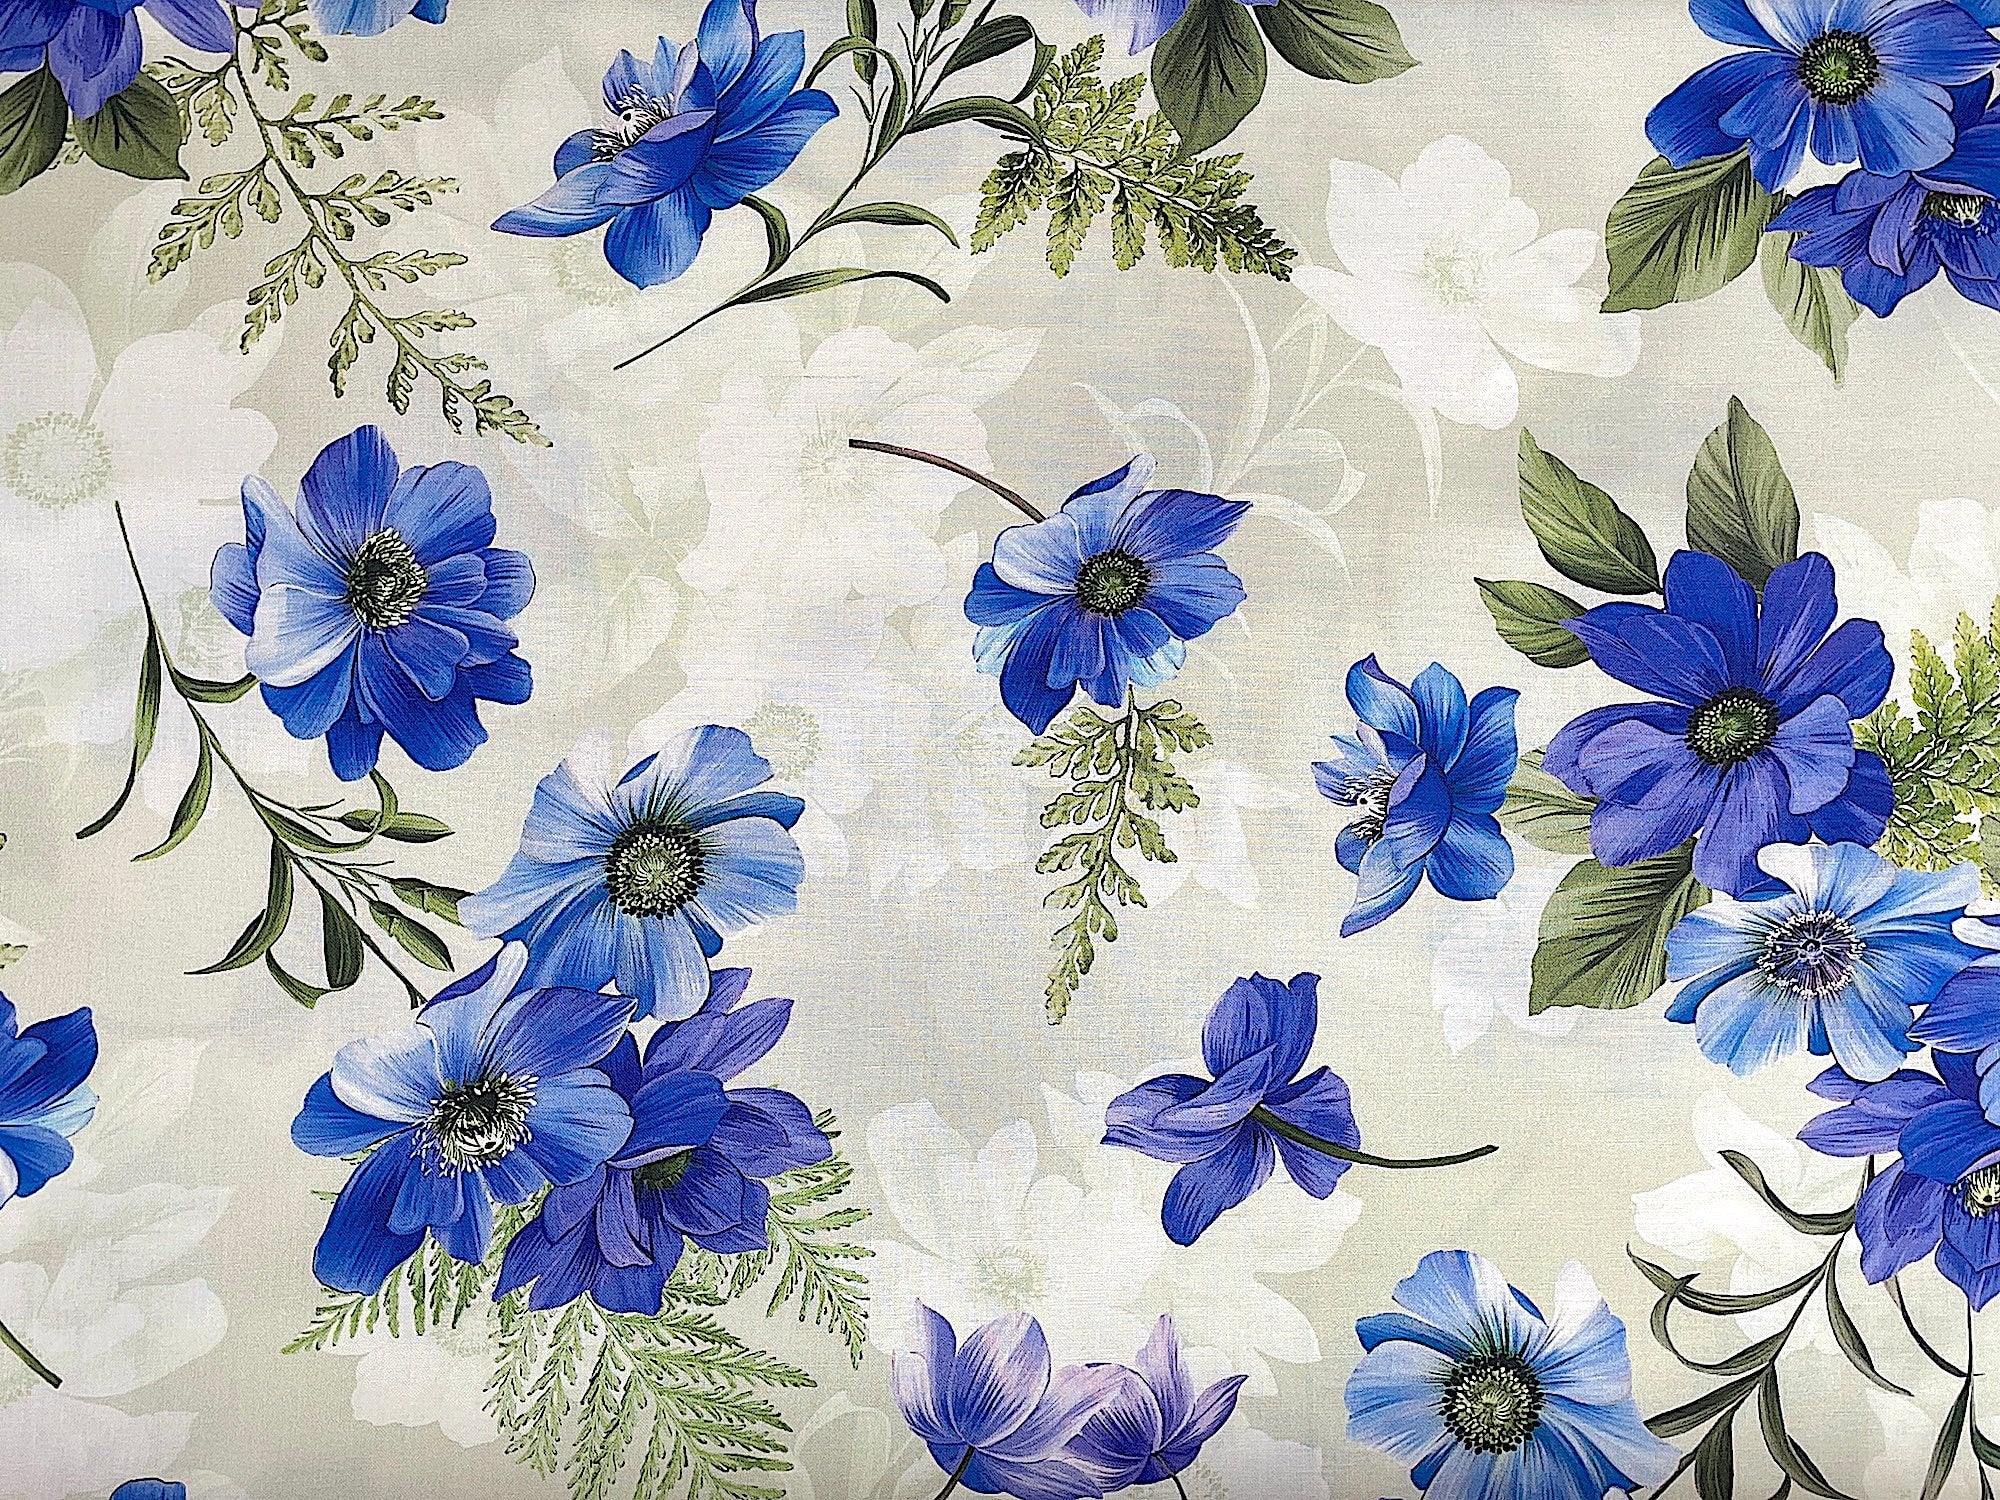 This cotton fabric is covered with green ferns and flowers that are shades of blue and lavender. The background is light cream/beige. This fabric by Michael Miller is part of the Floral Fantasy collection.